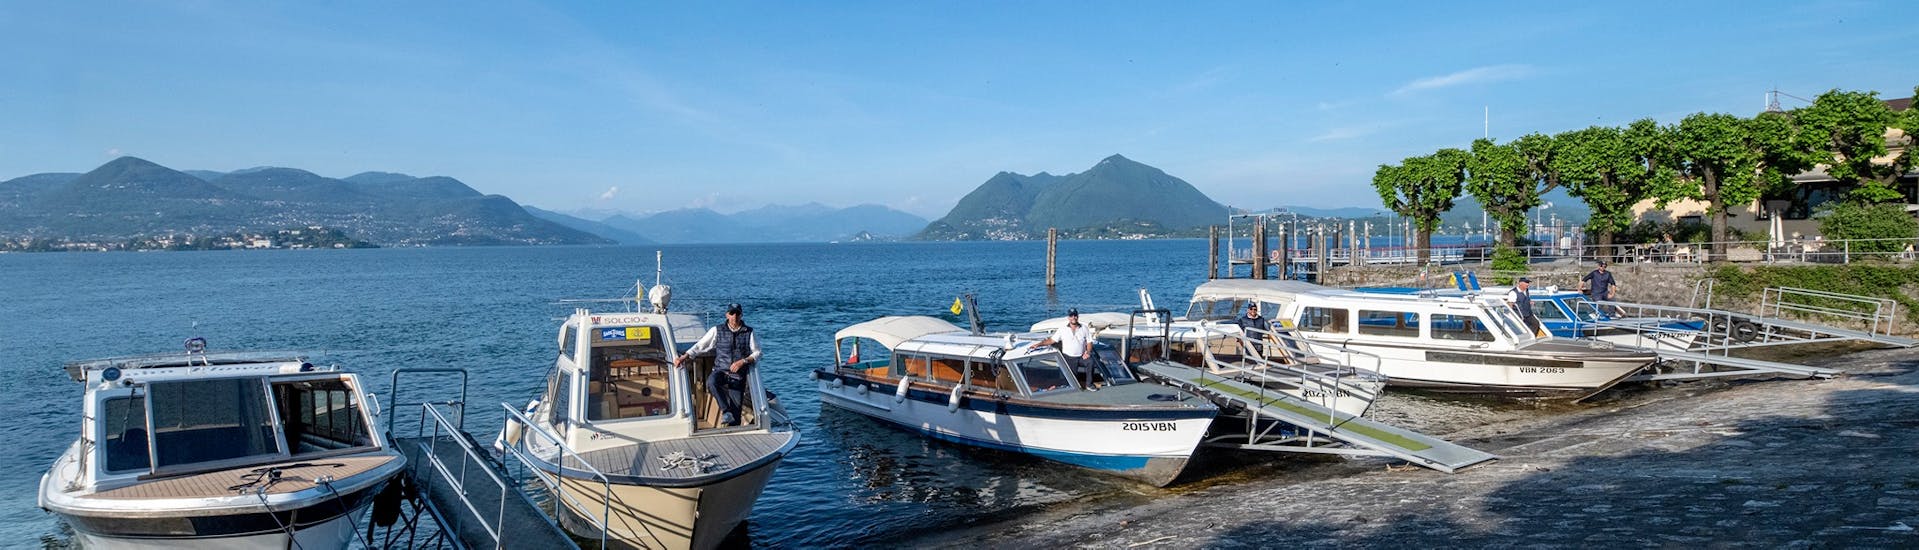 View of the boats used for the Boat Transfer from Stresa to Isola Pescatori with Lake Tours Stresa.